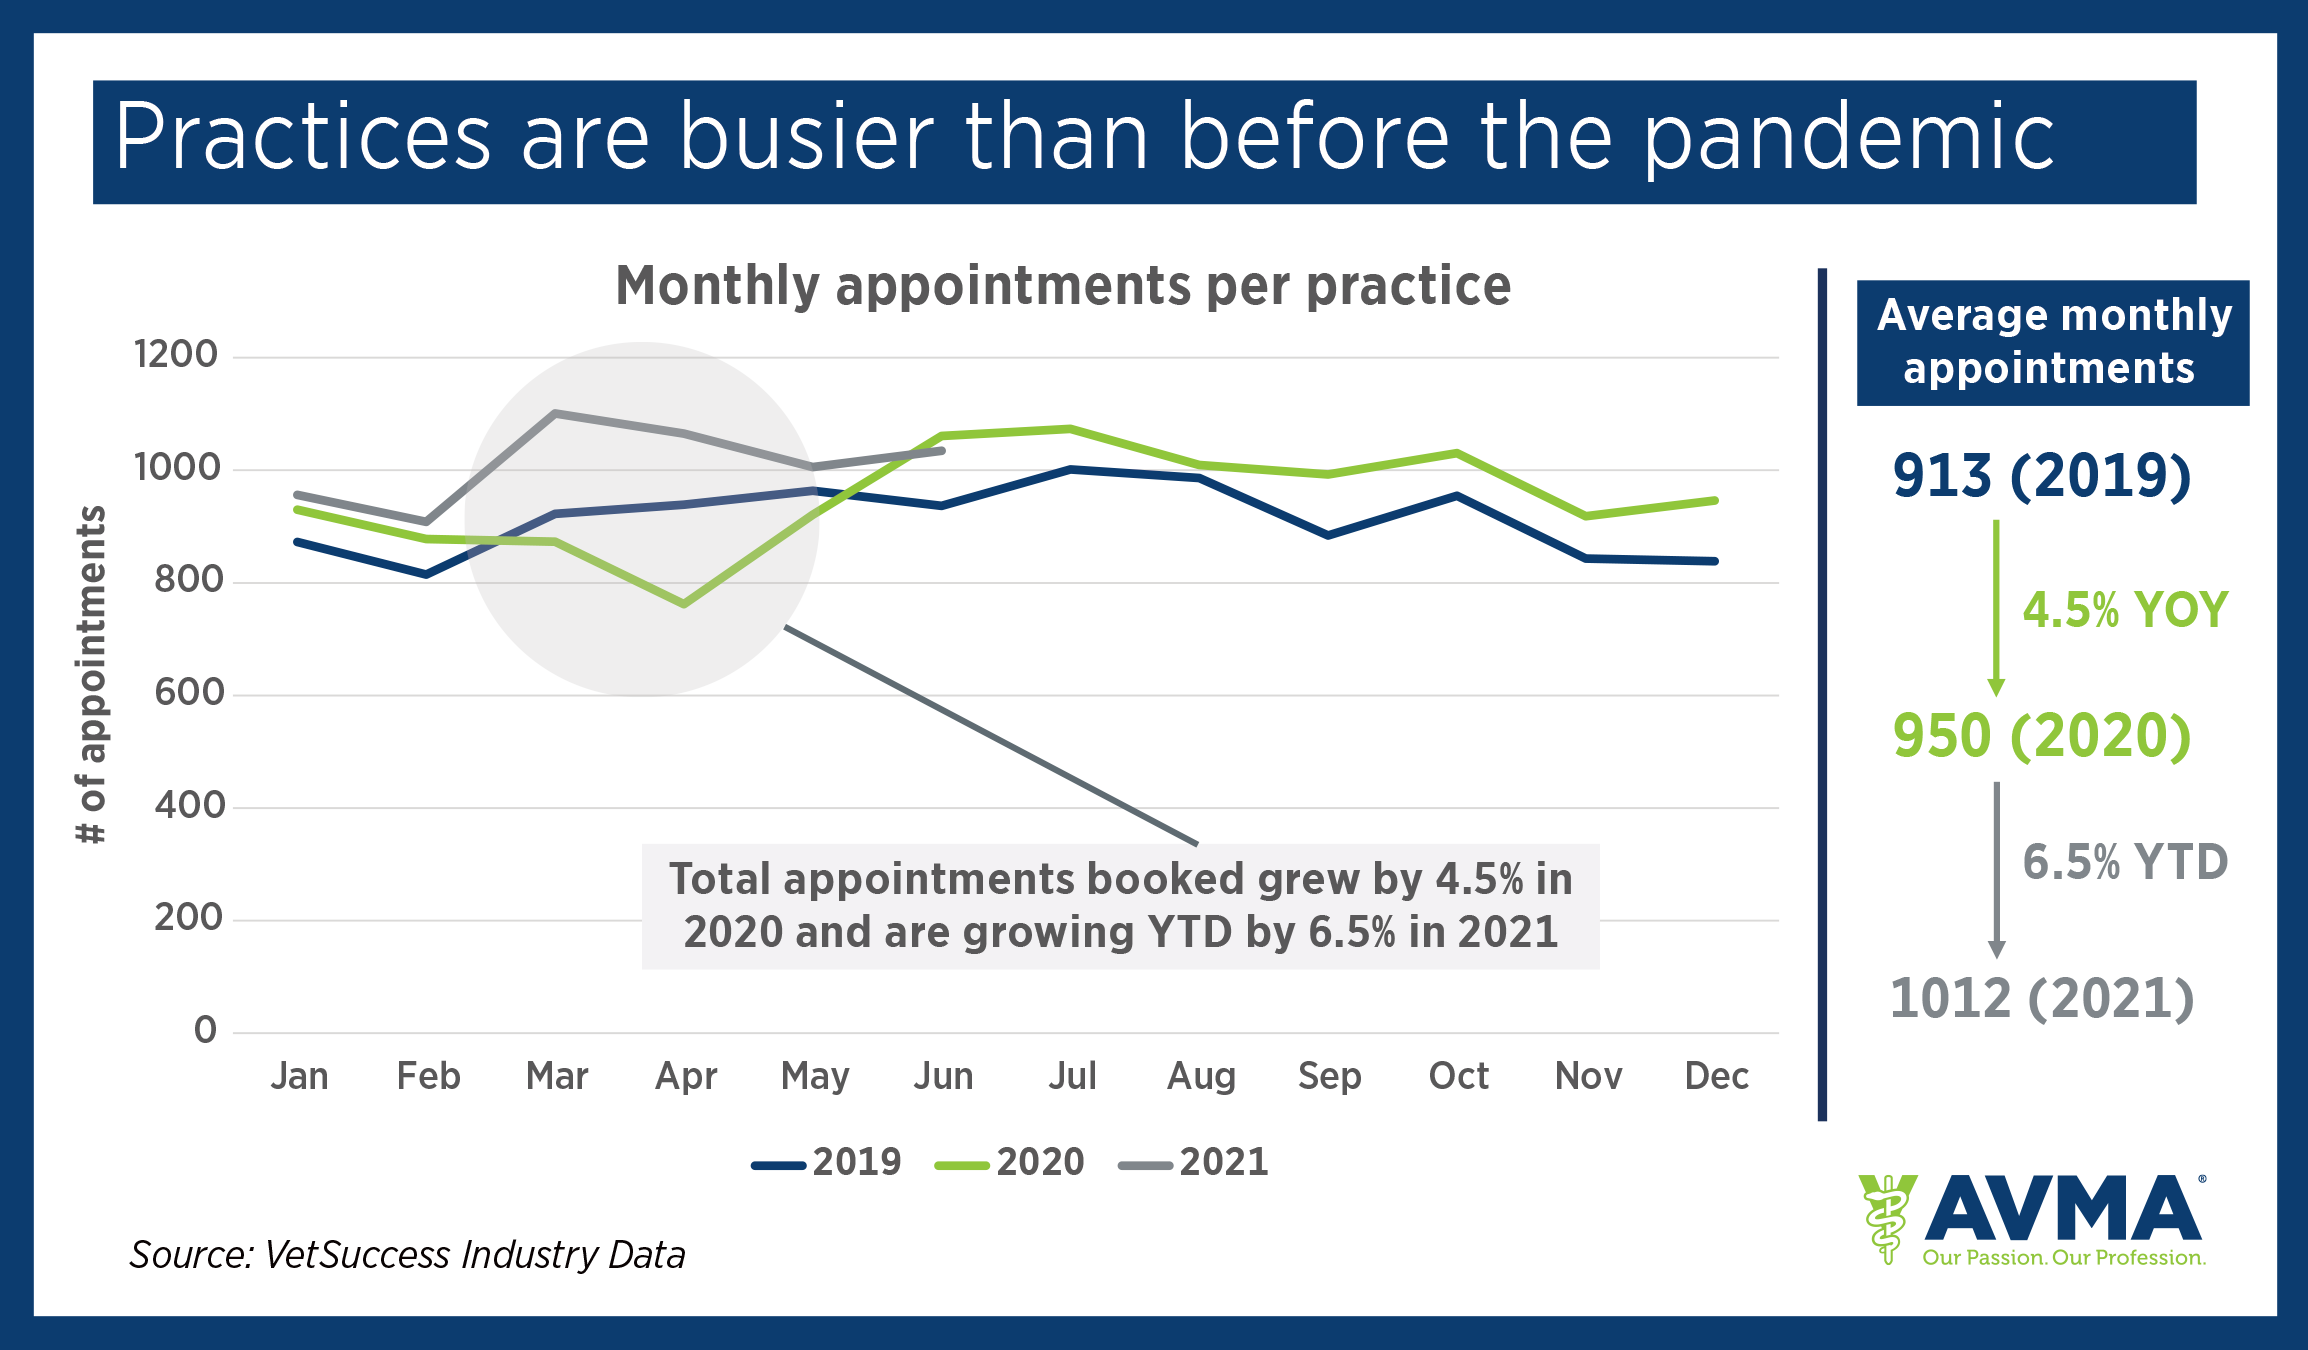 Chart showing that total veterinary appointments booked grew by 4.5% in 2020 and continued growing by 6.5% in 2021.